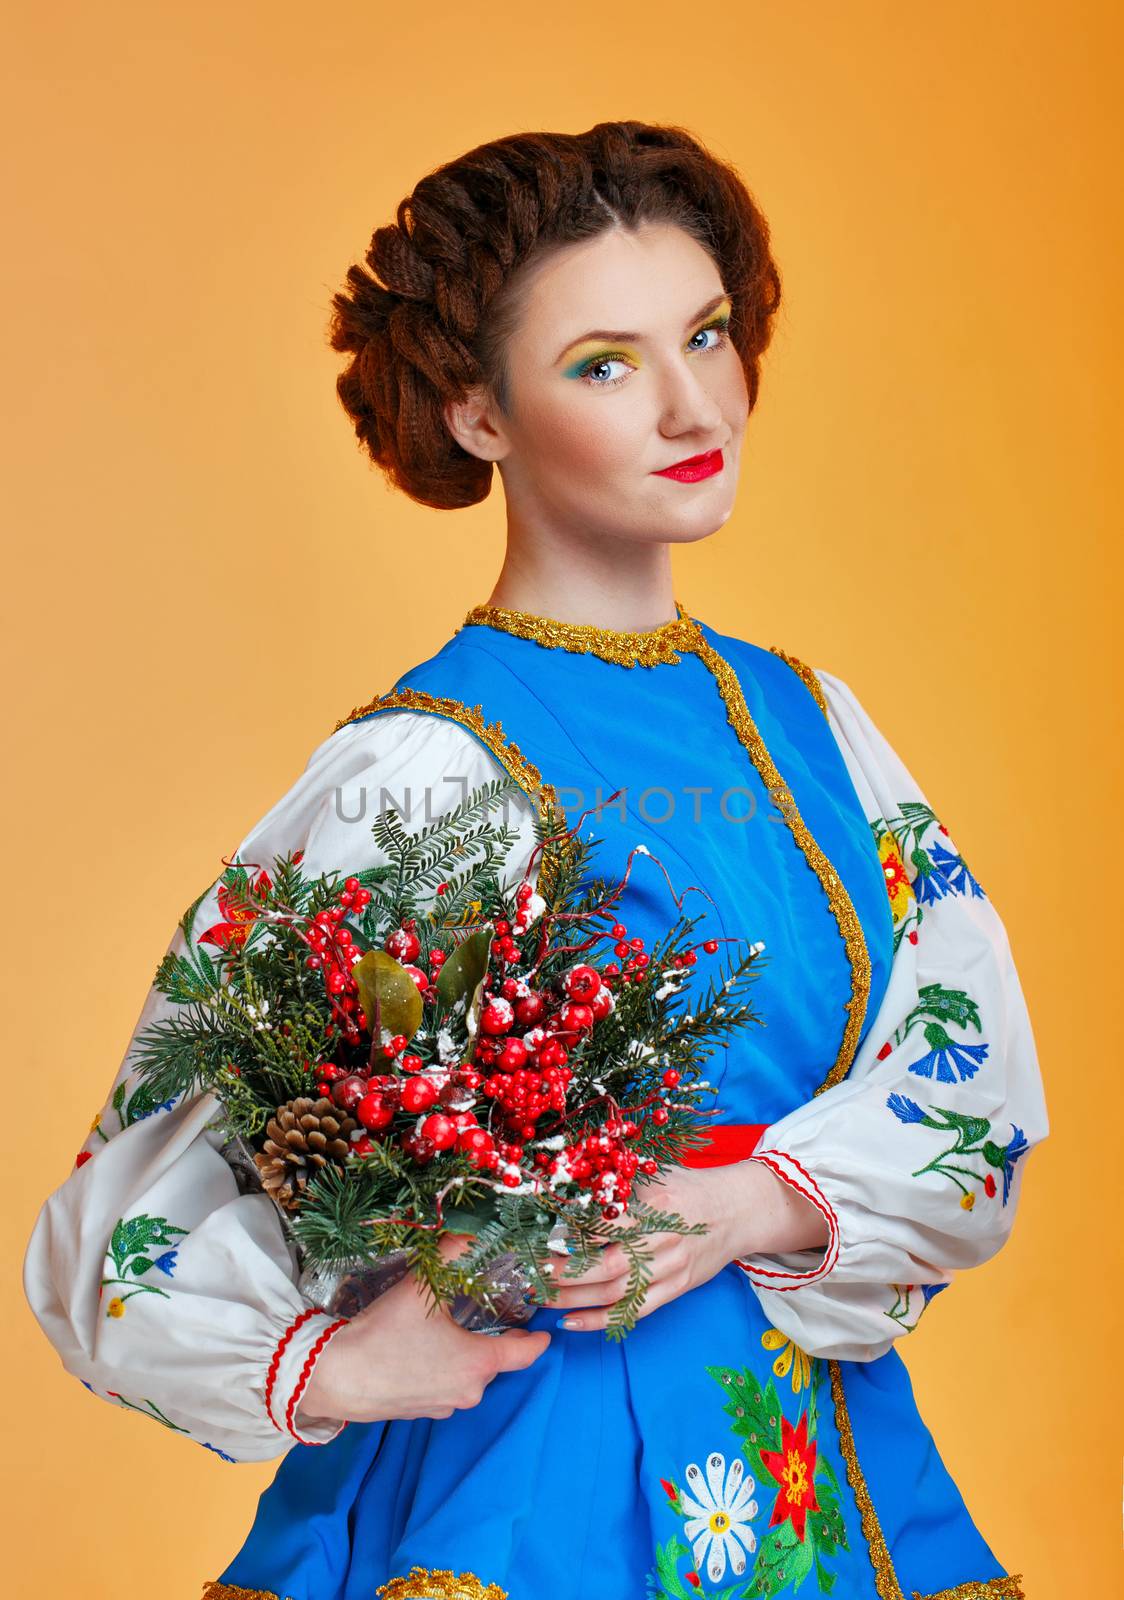 Girl holding flowers in her hands wearing national costume